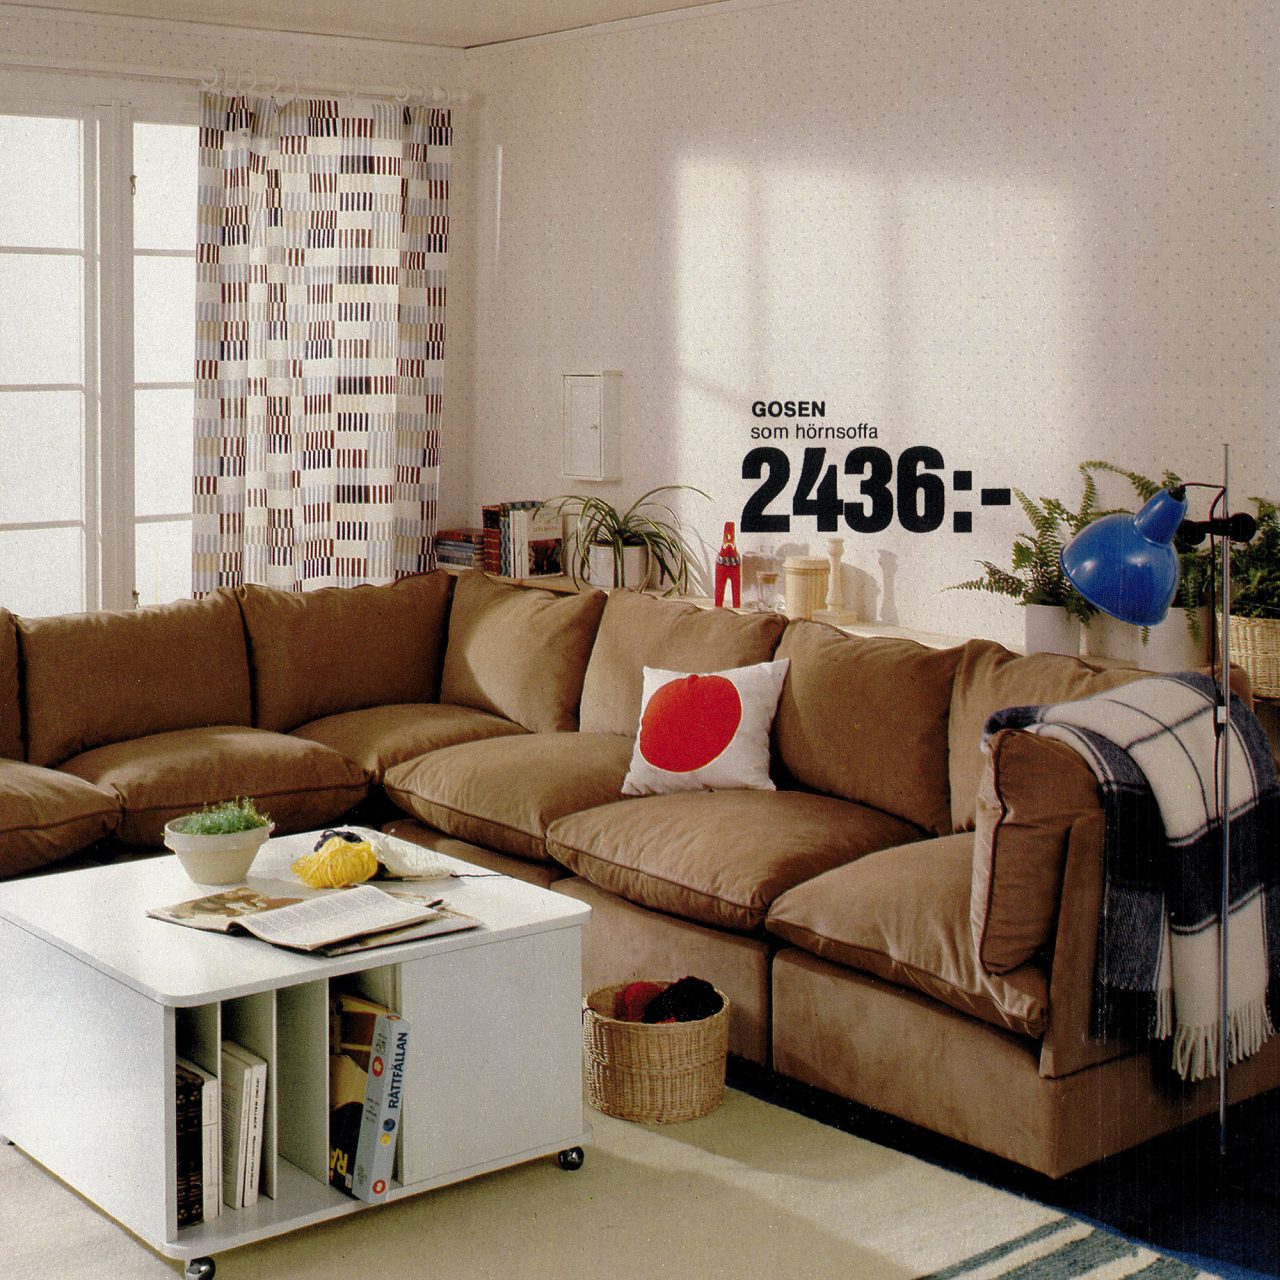 Living room with a beige corduroy corner sofa, white square coffee table, and curtains in a graphic pattern.